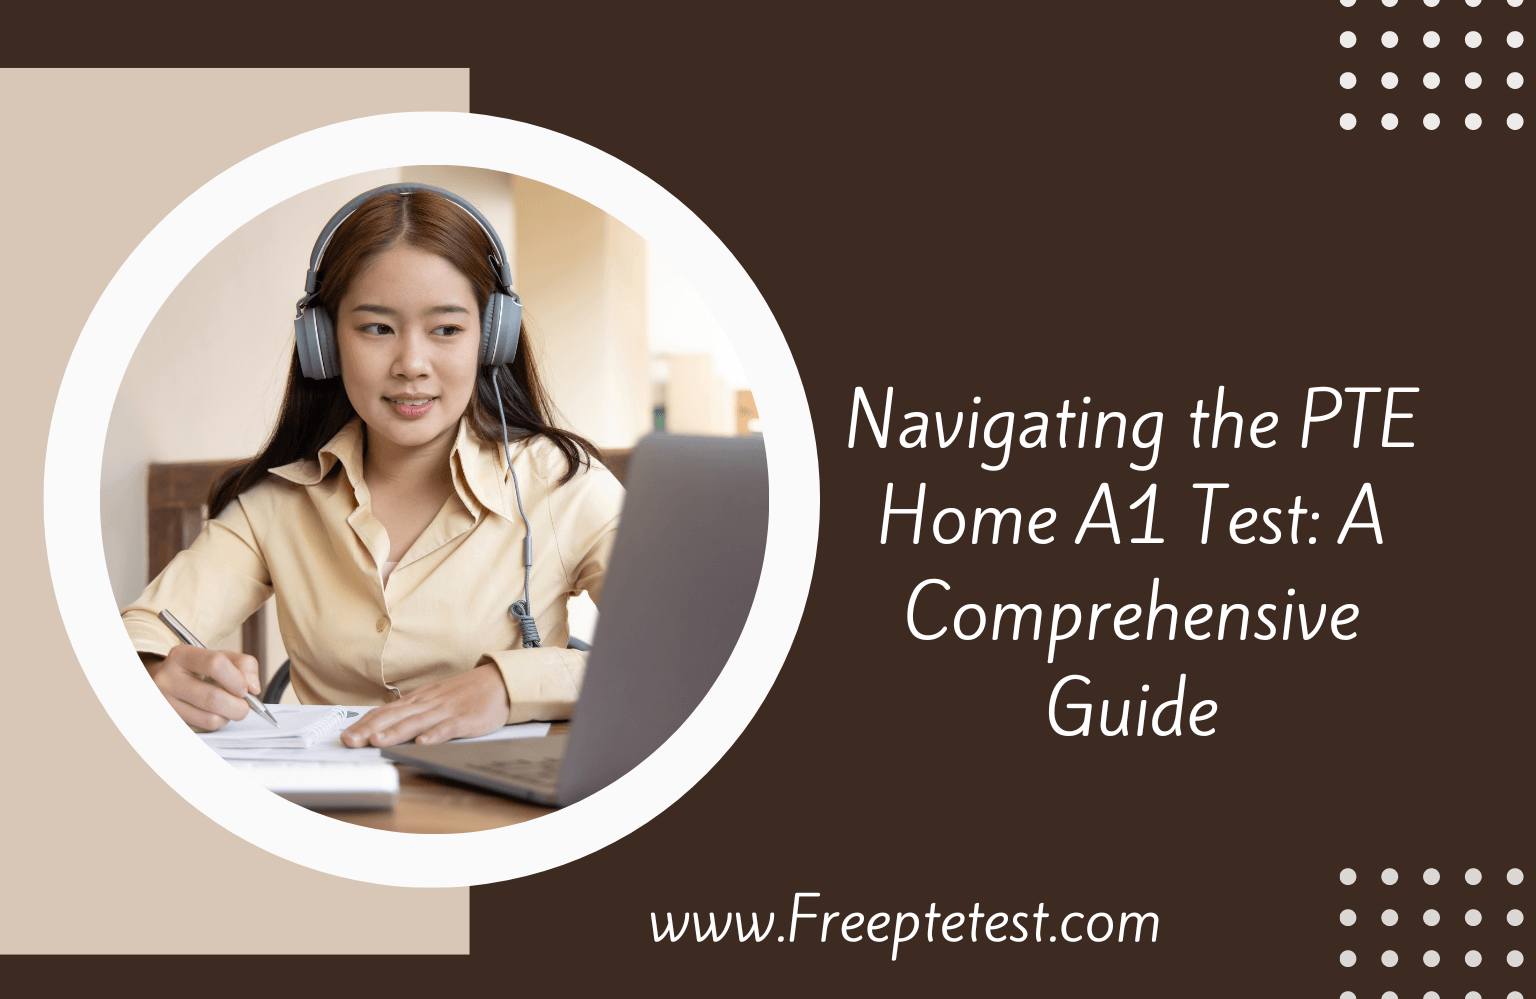 Navigating the PTE Home A1 Test: A Comprehensive Guide